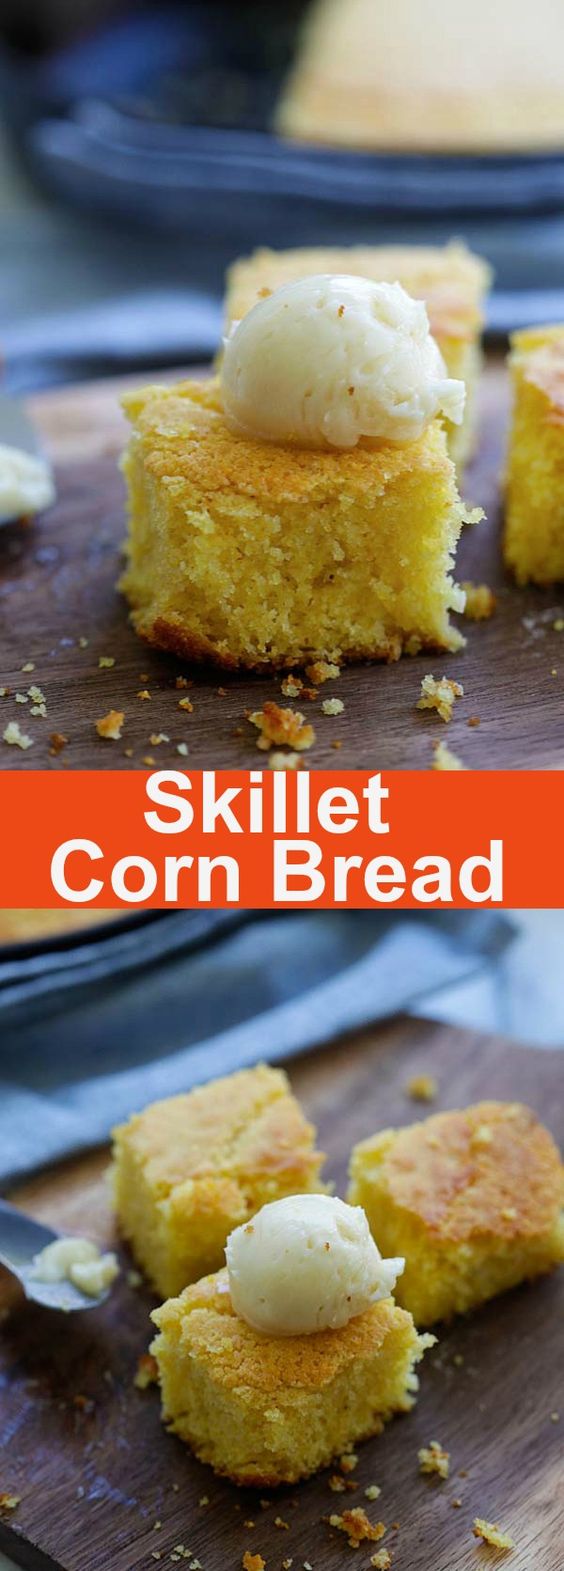 Skillet Corn Bread – the easiest and most delicious corn bread recipe ever. Made in a skillet and bake in oven and served with whipped honey butter | rasamalaysia.com